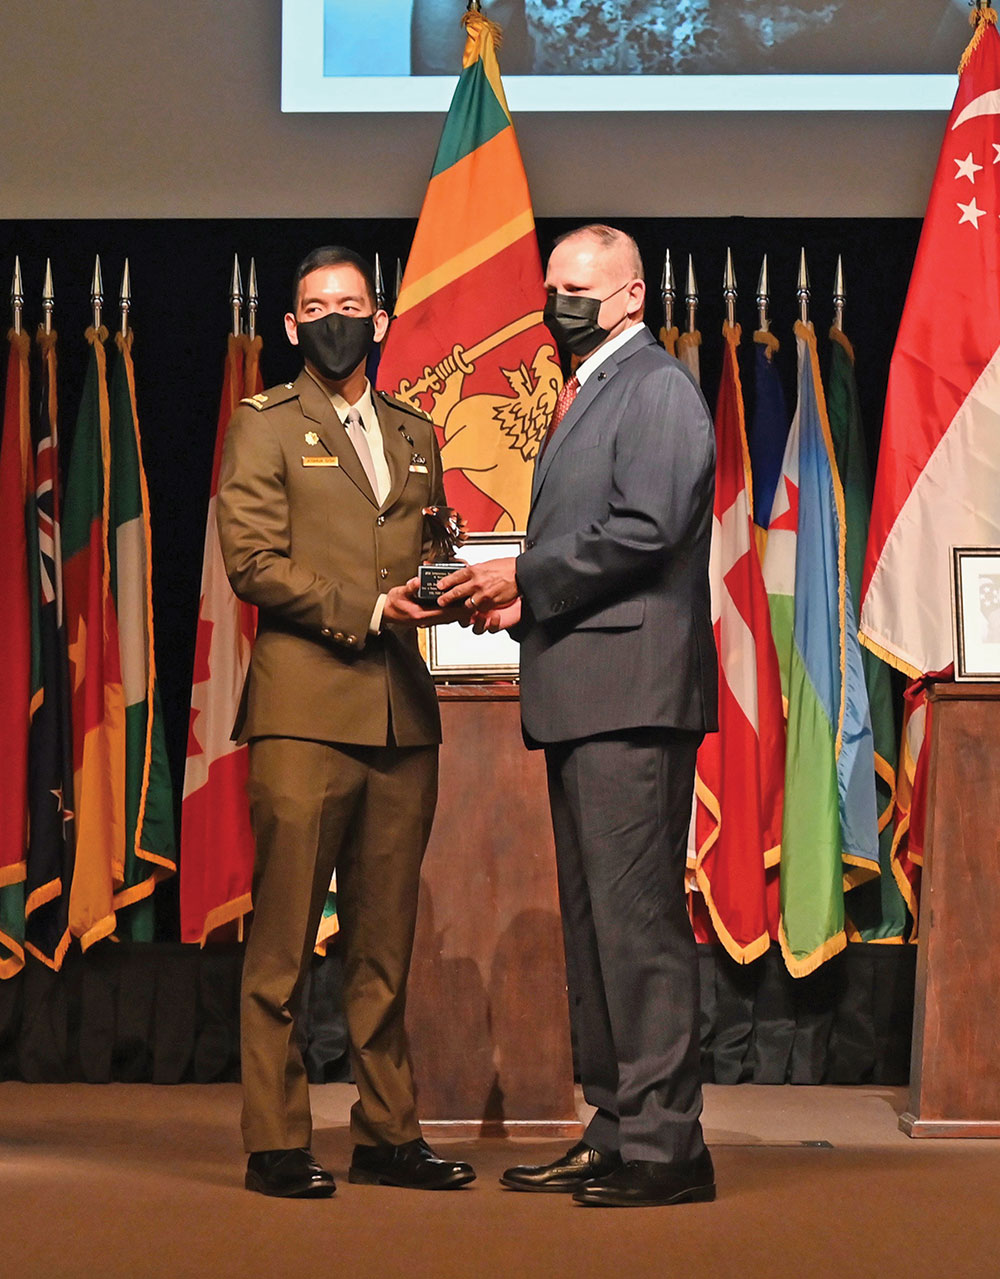 CGSC Foundation Chairman Brig. Gen. (Ret.) Bryan Wampler, right, presents an eagle statuette to Lt. Gen. Perry Lim Cheng Yeo from Singapore symbolizing his appointment as a life constituent of the CGSC Foundation during the the CGSC International Hall of Fame Induction Ceremony Nov. 16, 2021. Current CGSOC Class of 2022 student from Singapore, Maj. Joshua Goh, accepts the award on the general’s behalf.